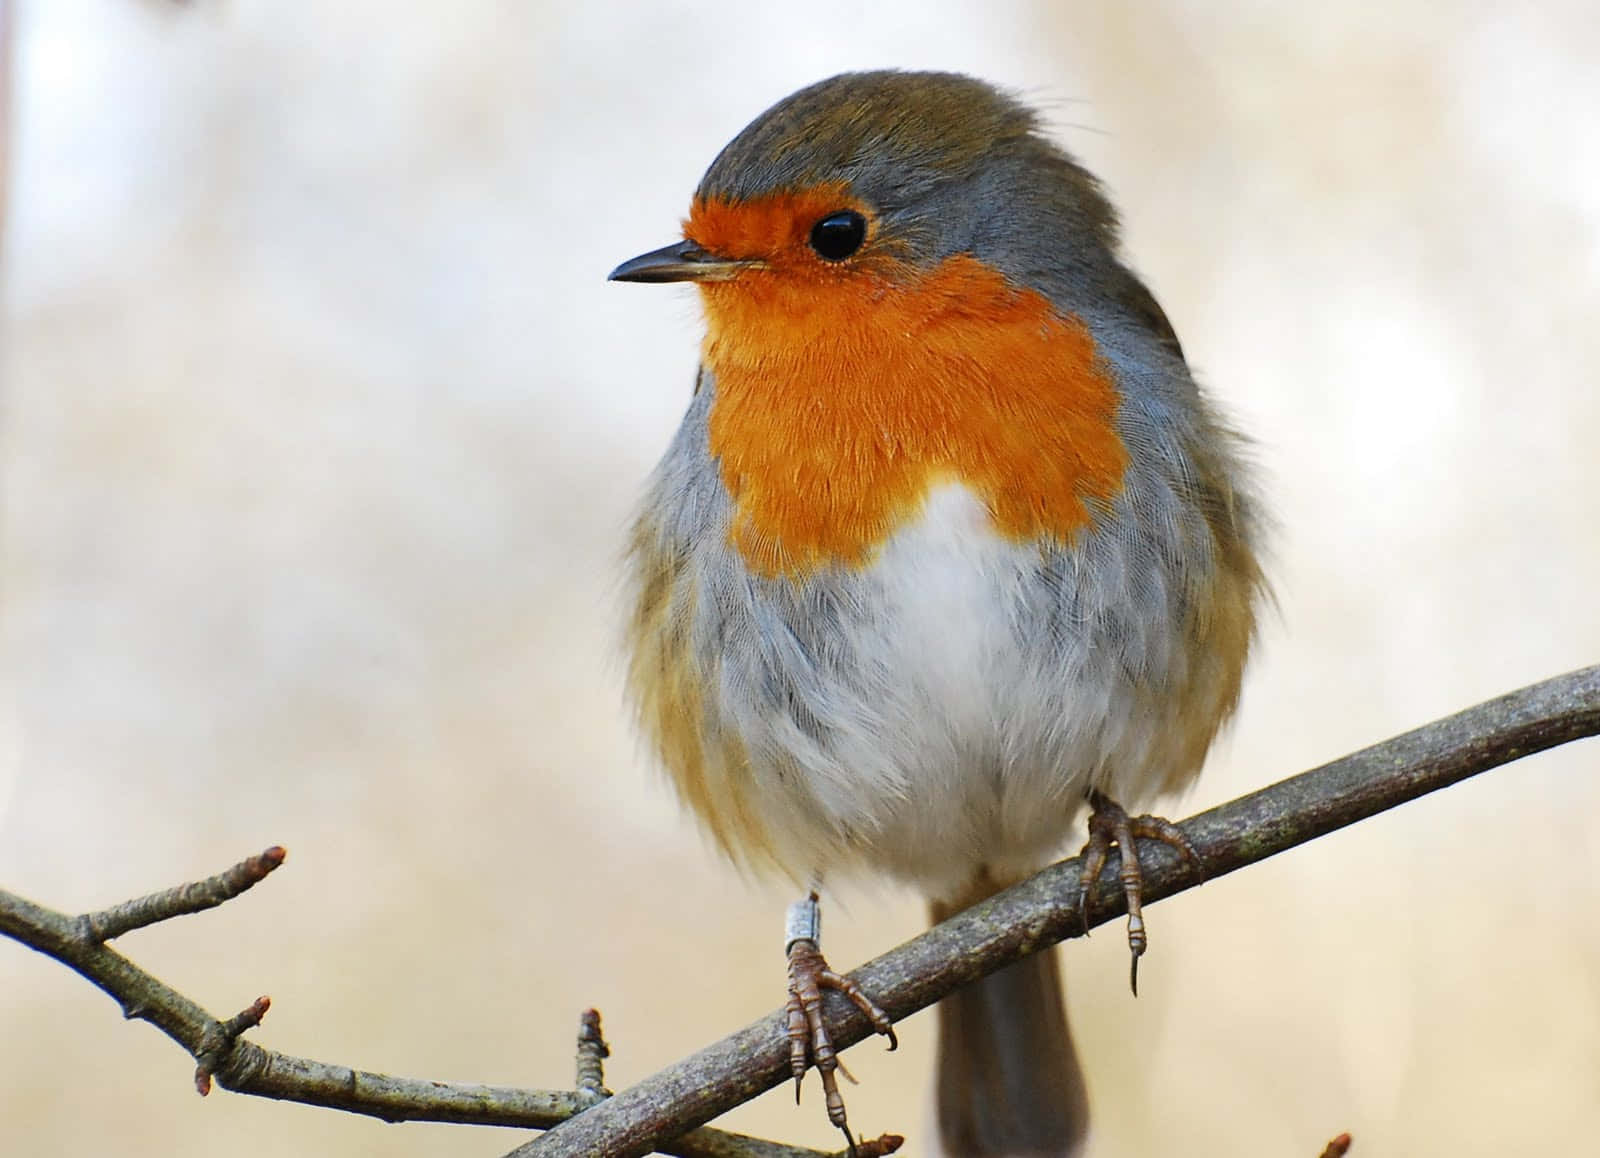 A cheery Robin perched on a branch in the Springtime